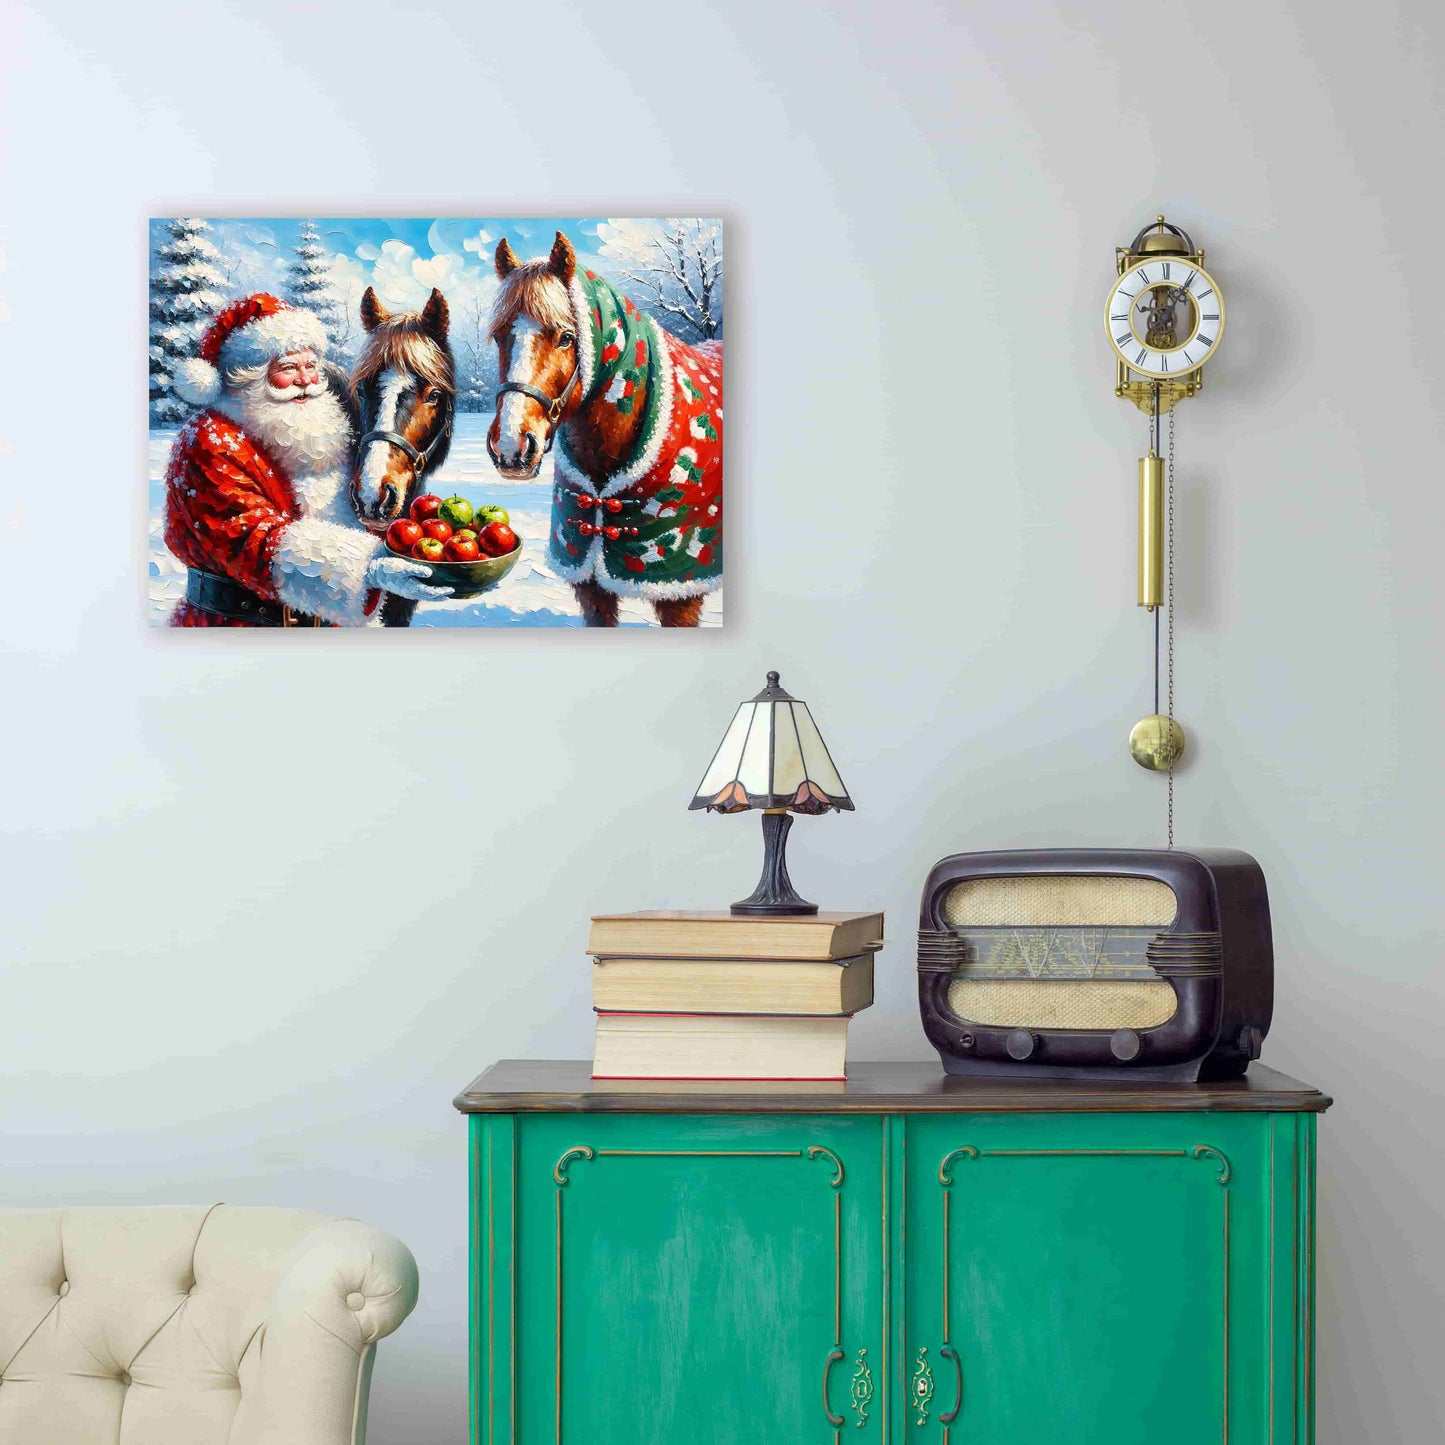 "Winter's Gentle Feast - Santa Claus with Festive Horses" Wrapped Canvas Wall Art Prints